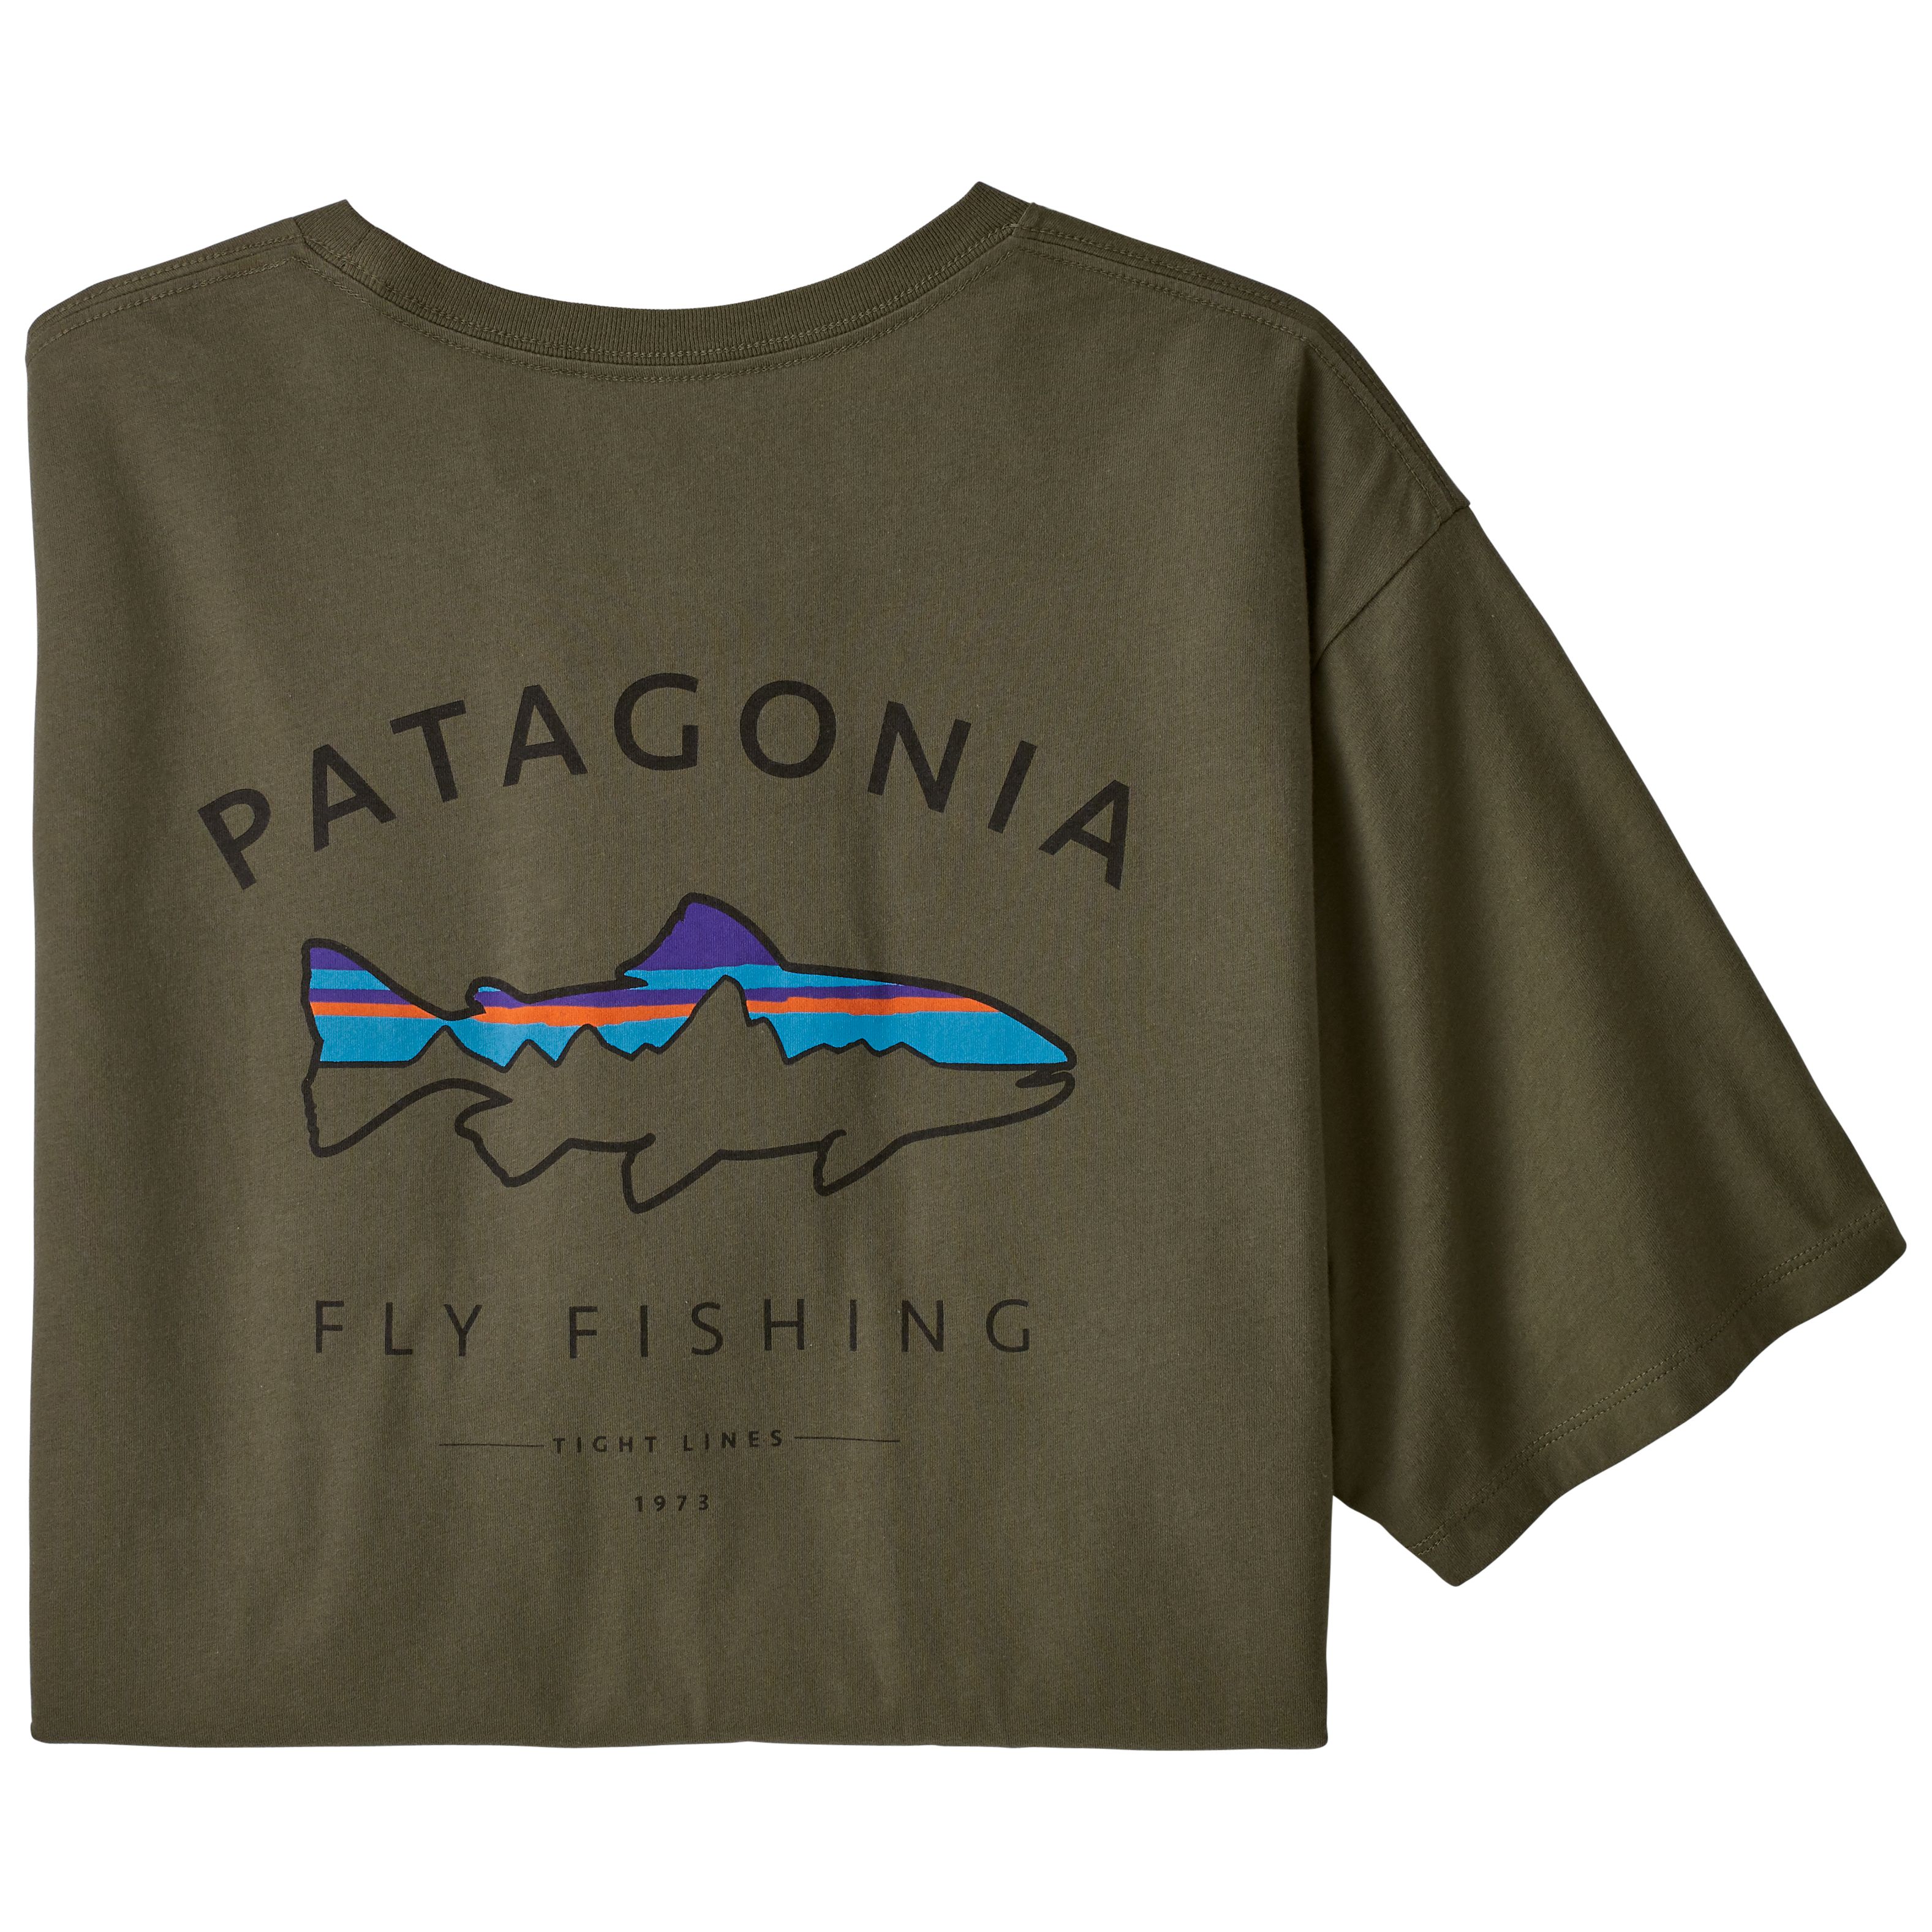 Patagonia Home Water Trout Organic Cotton T-Shirt